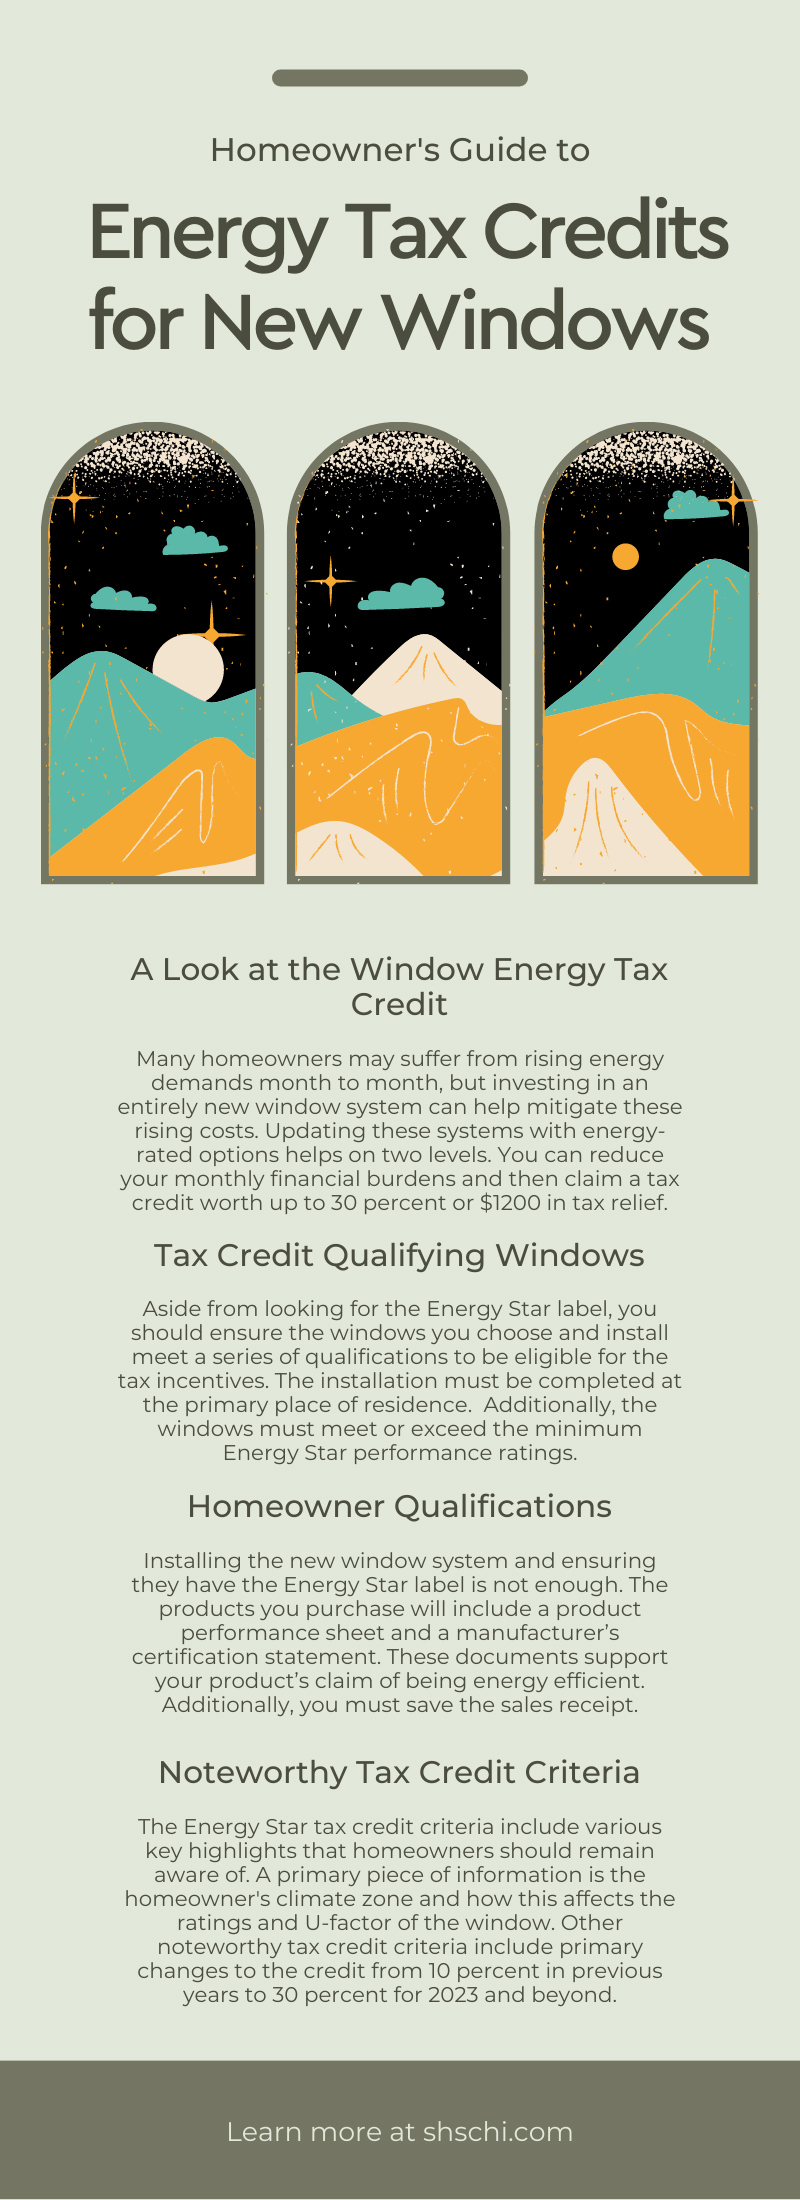 Homeowner's Guide to Energy Tax Credits for New Windows